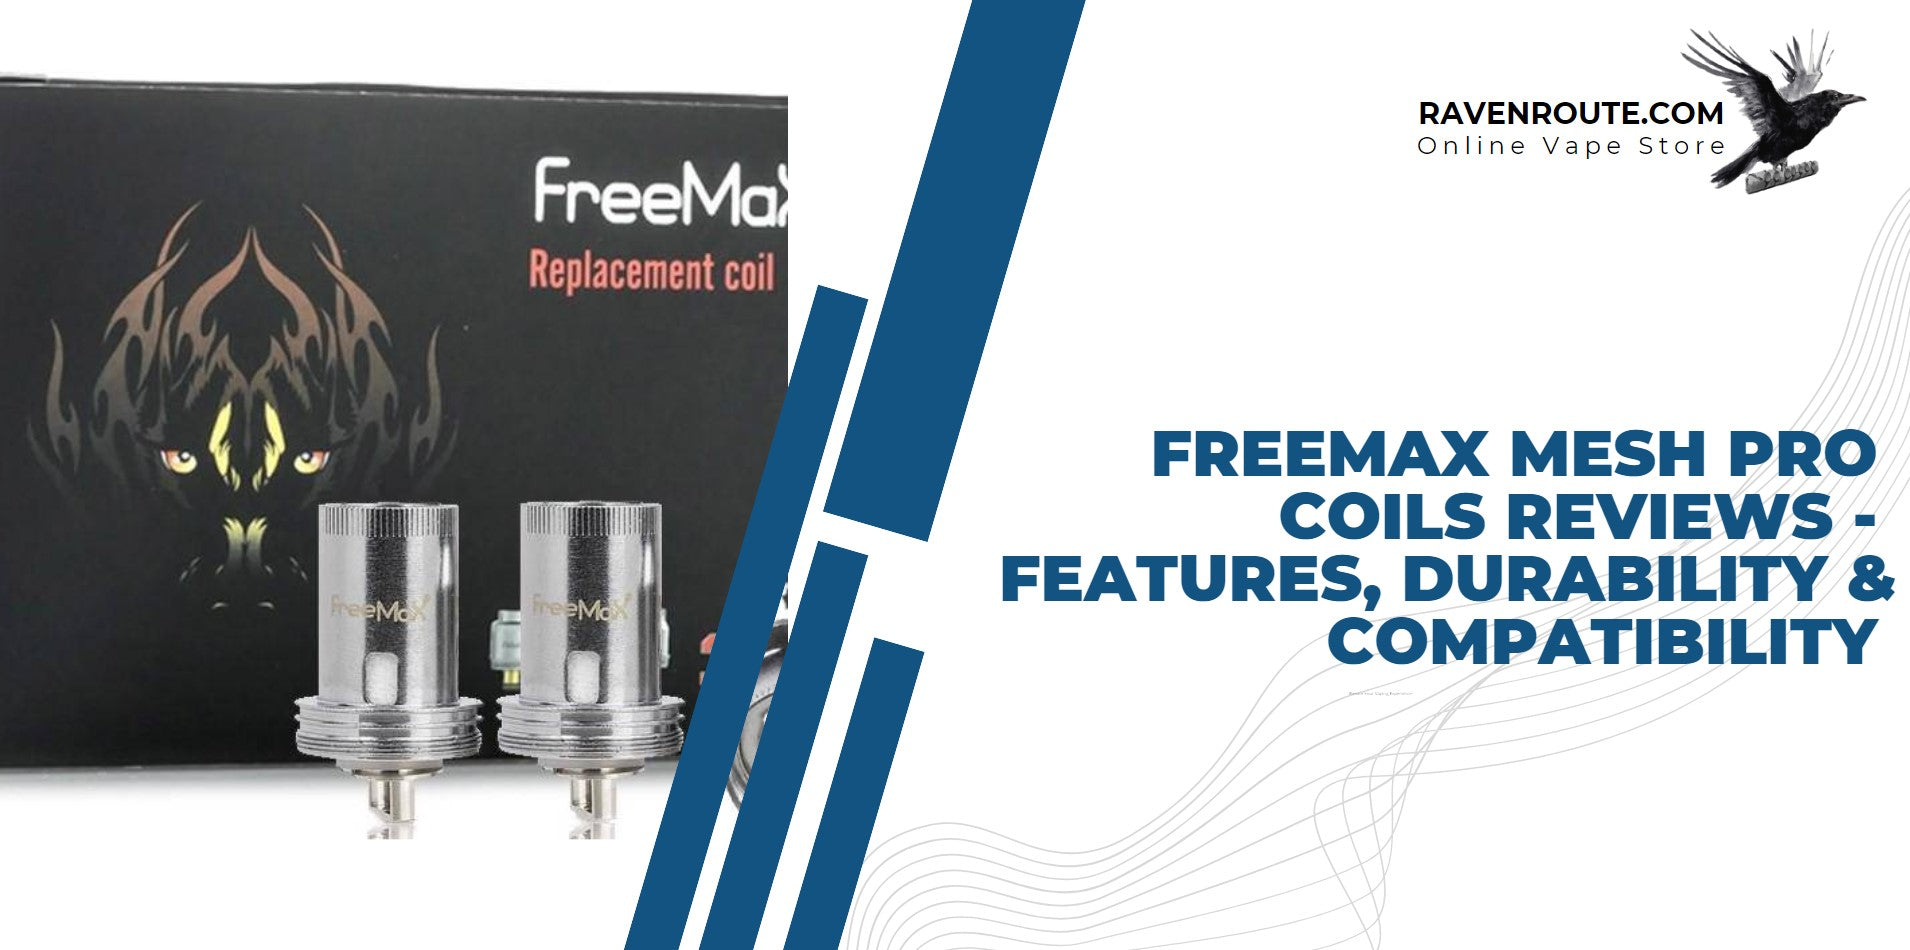 Freemax Mesh Pro Coils Reviews - Features, Durability & Compatibility